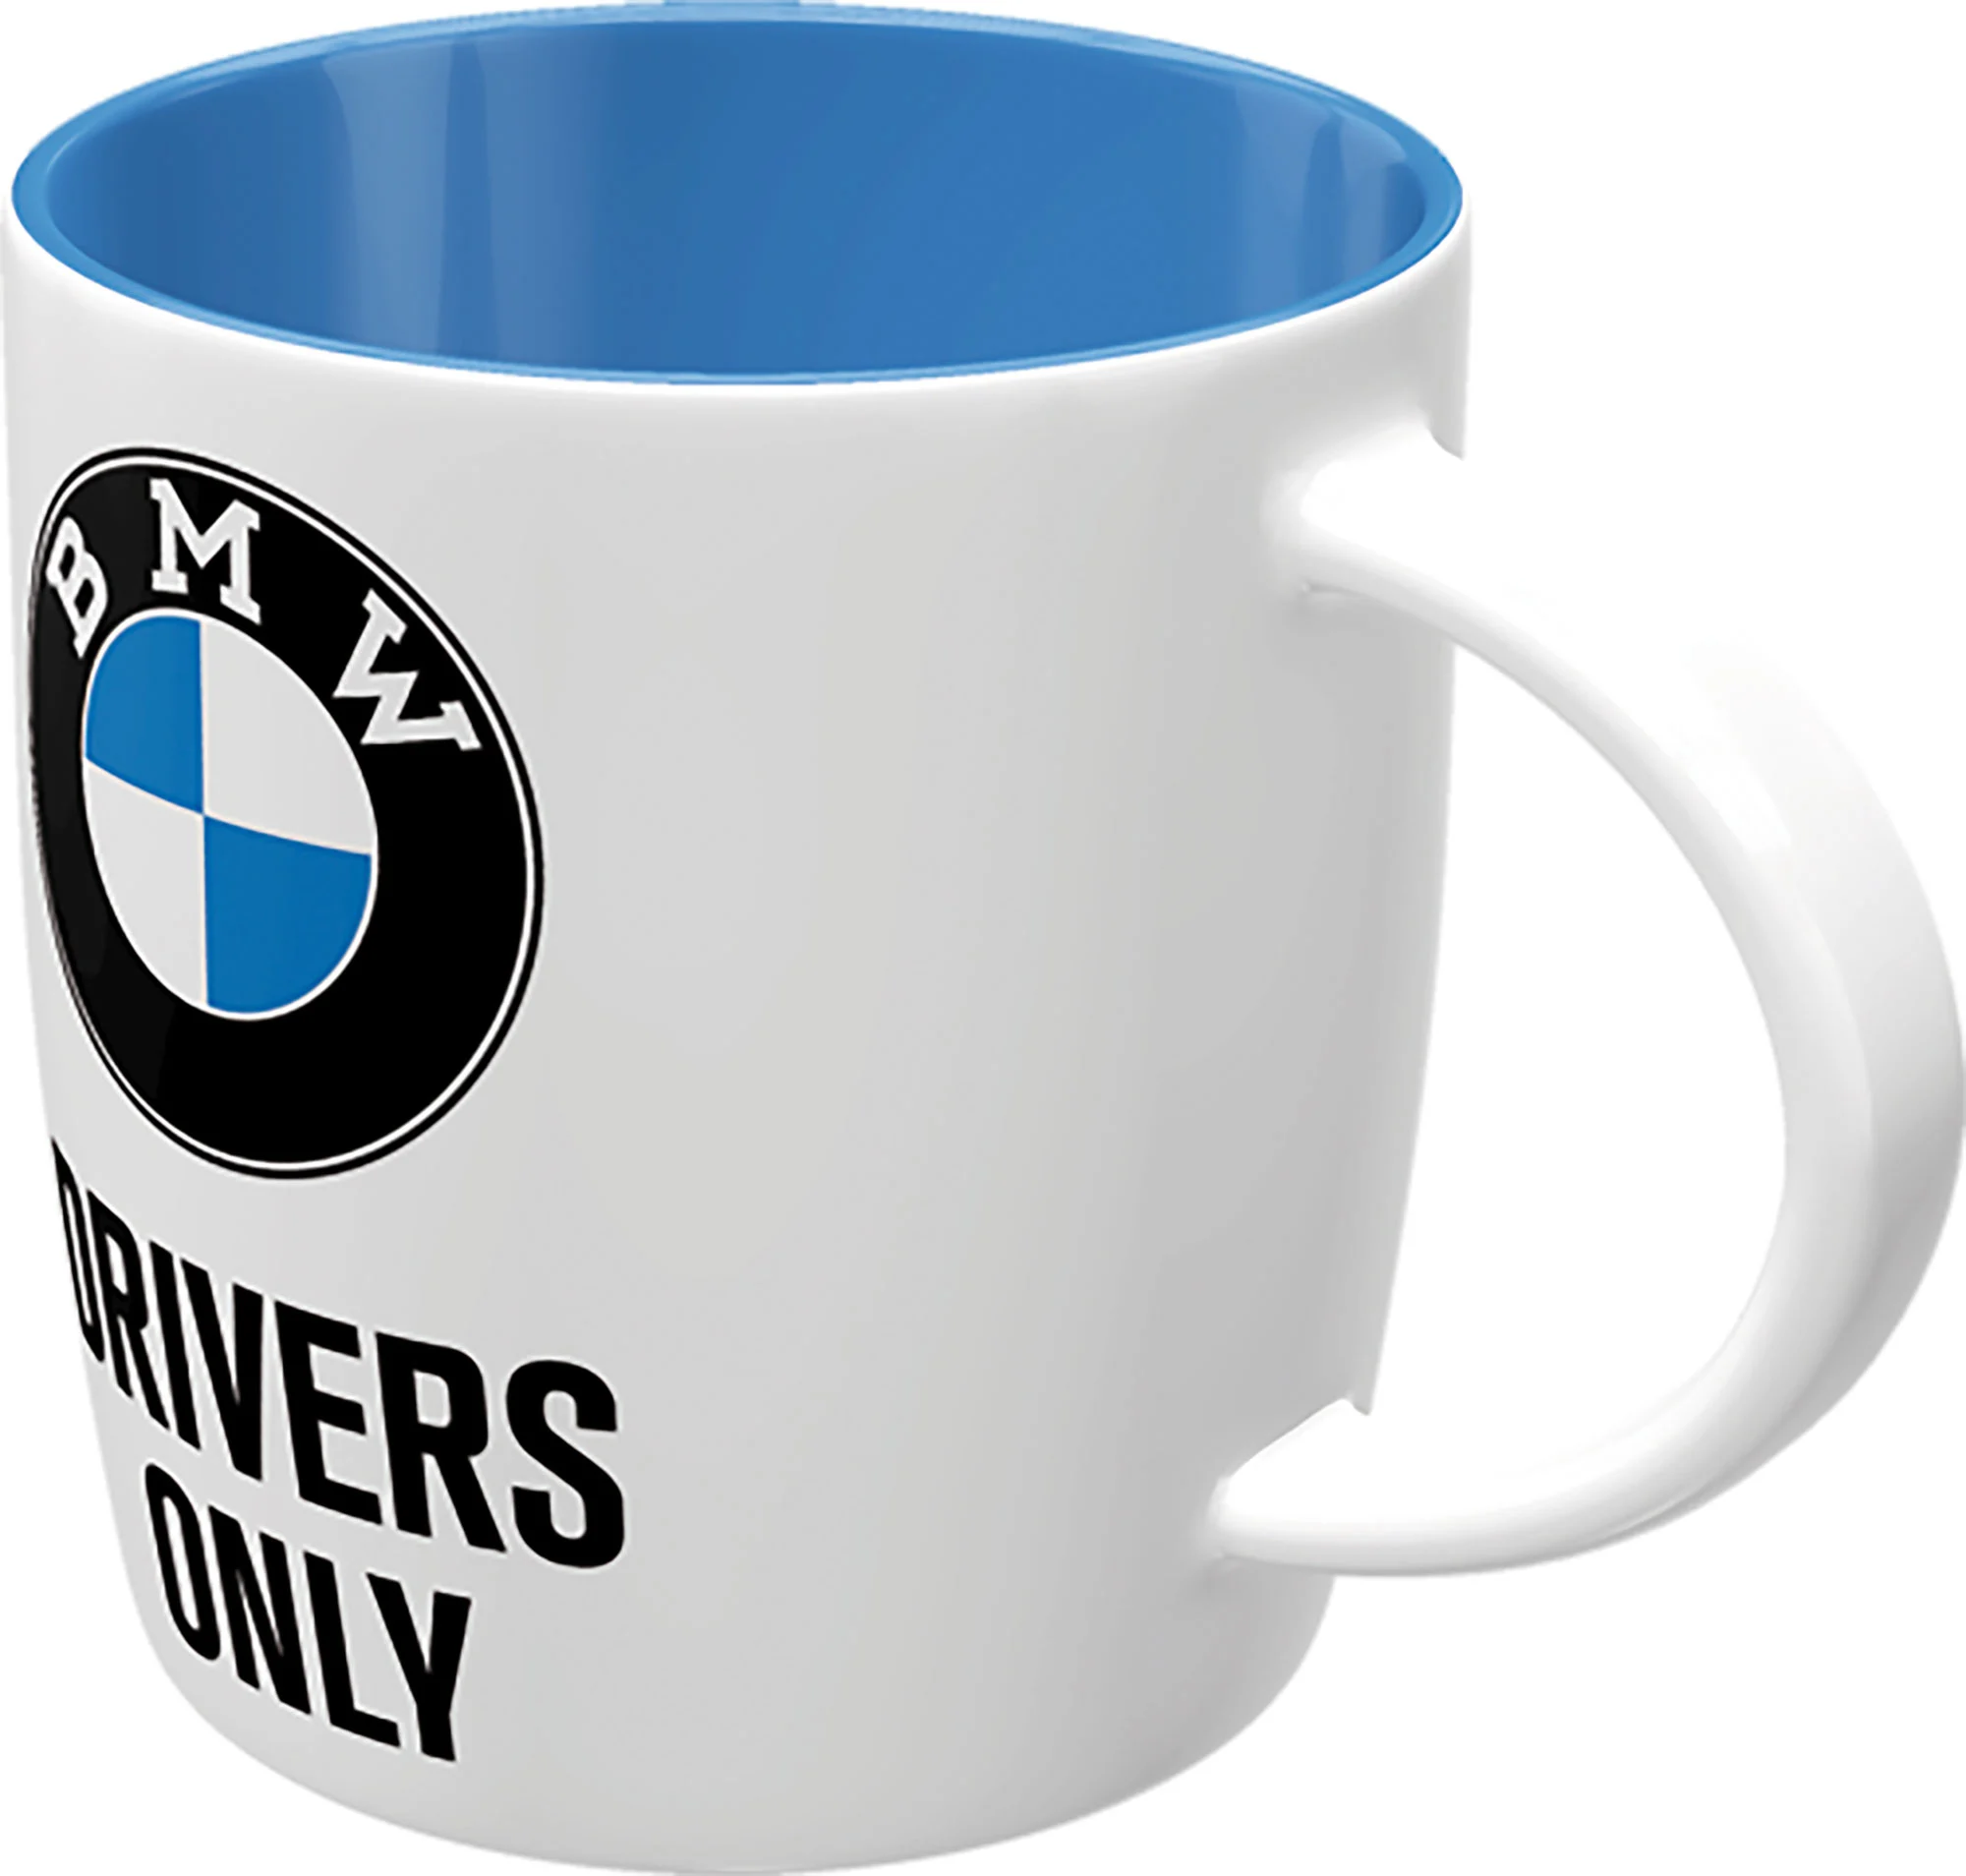 BEKER *BMW DRIVERS ONLY*